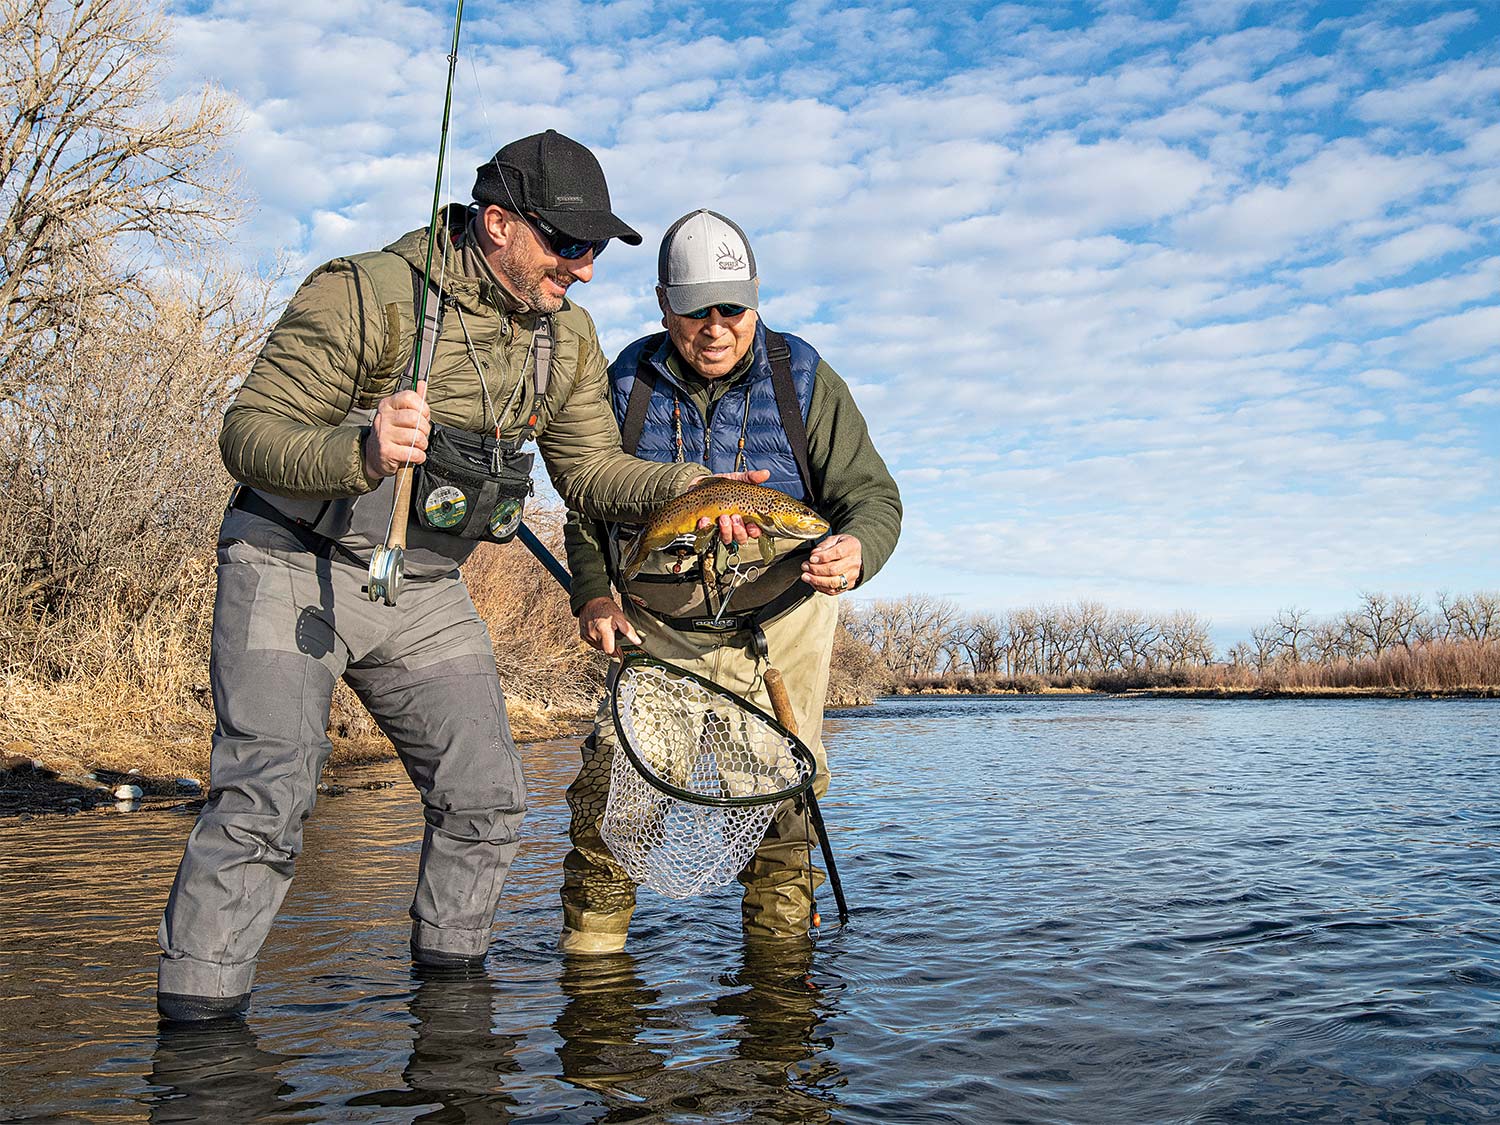 Two anglers fishing trout in Montana's Bighorn River.